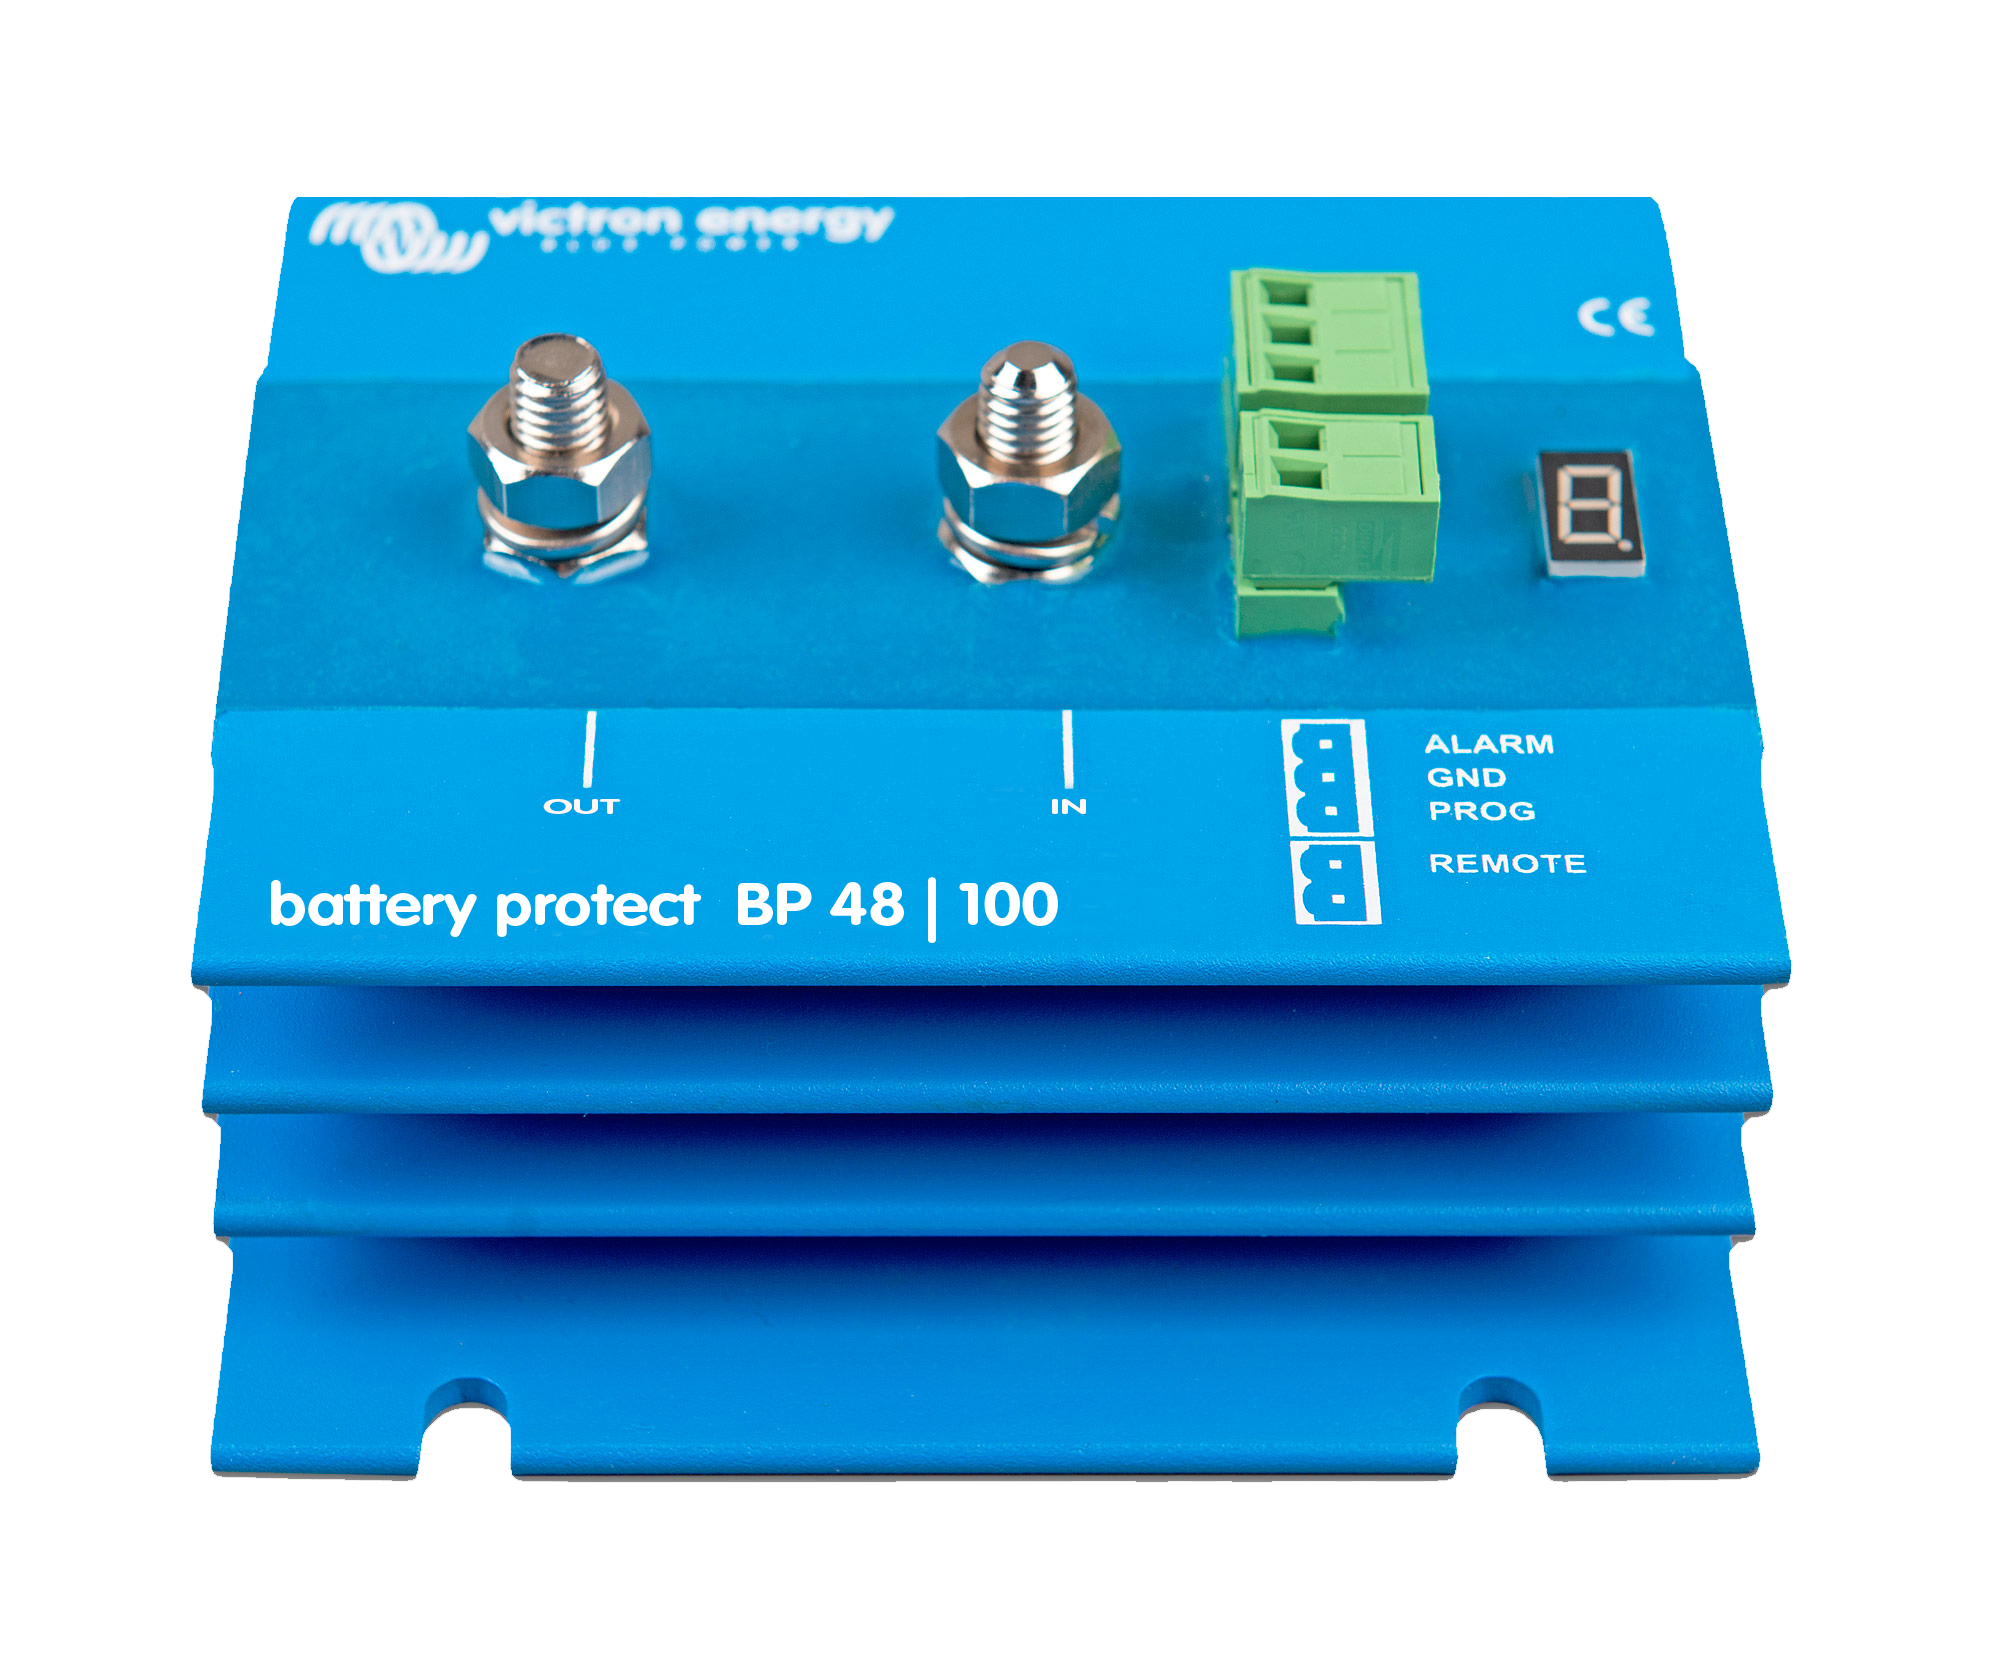 BatteryProtect - Victron Energy